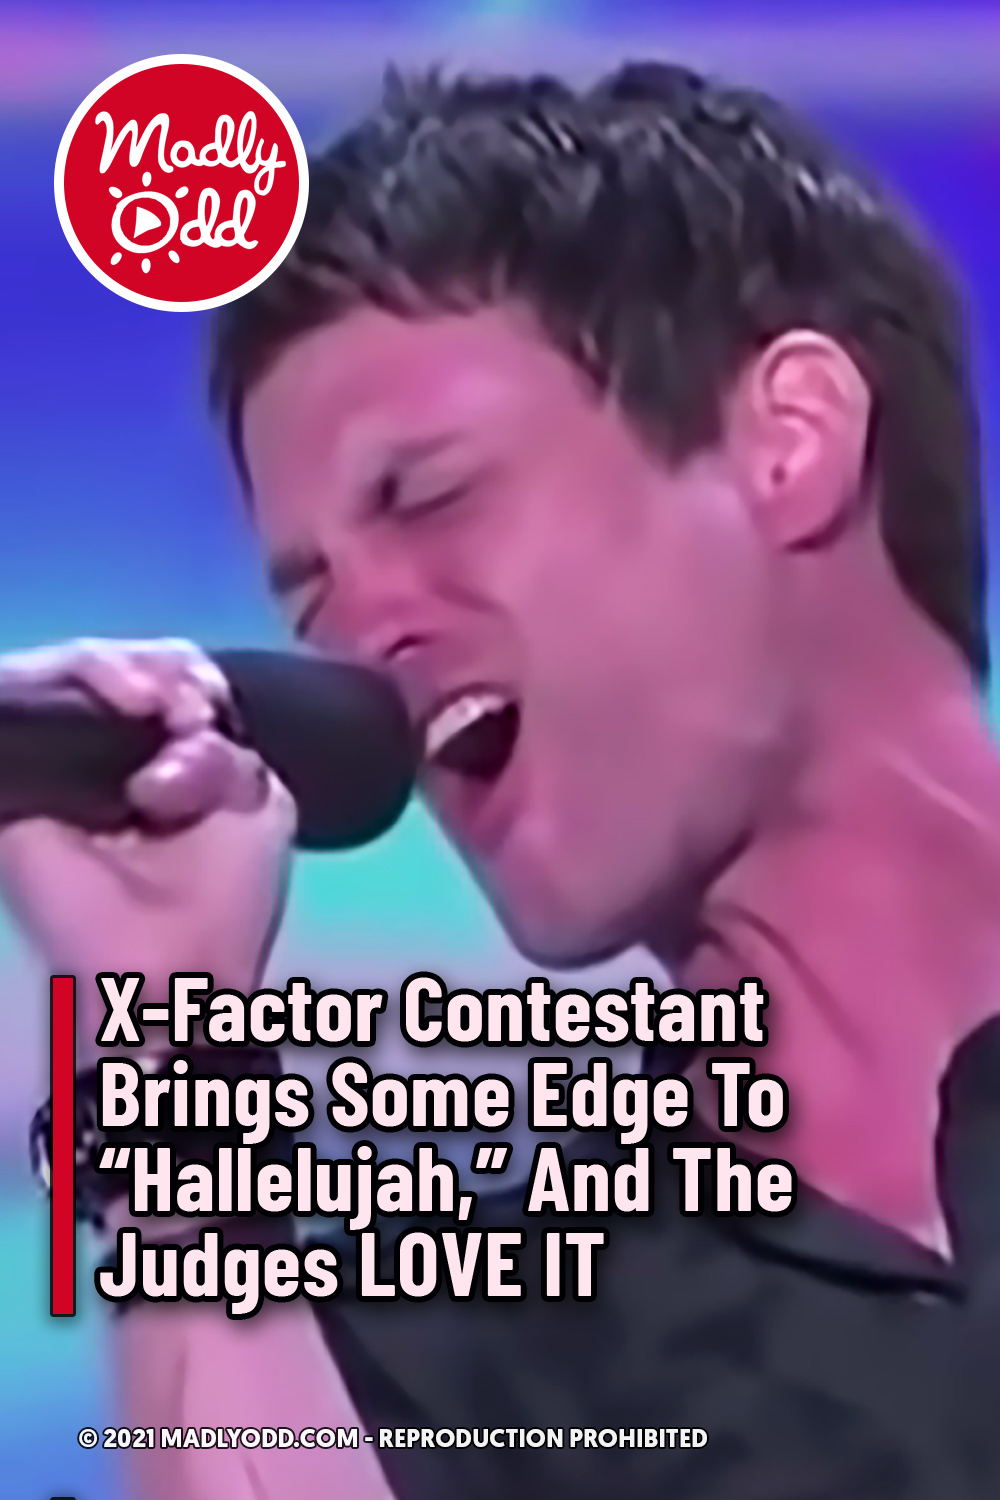 X-Factor Contestant Brings Some Edge To “Hallelujah,” And The Judges LOVE IT